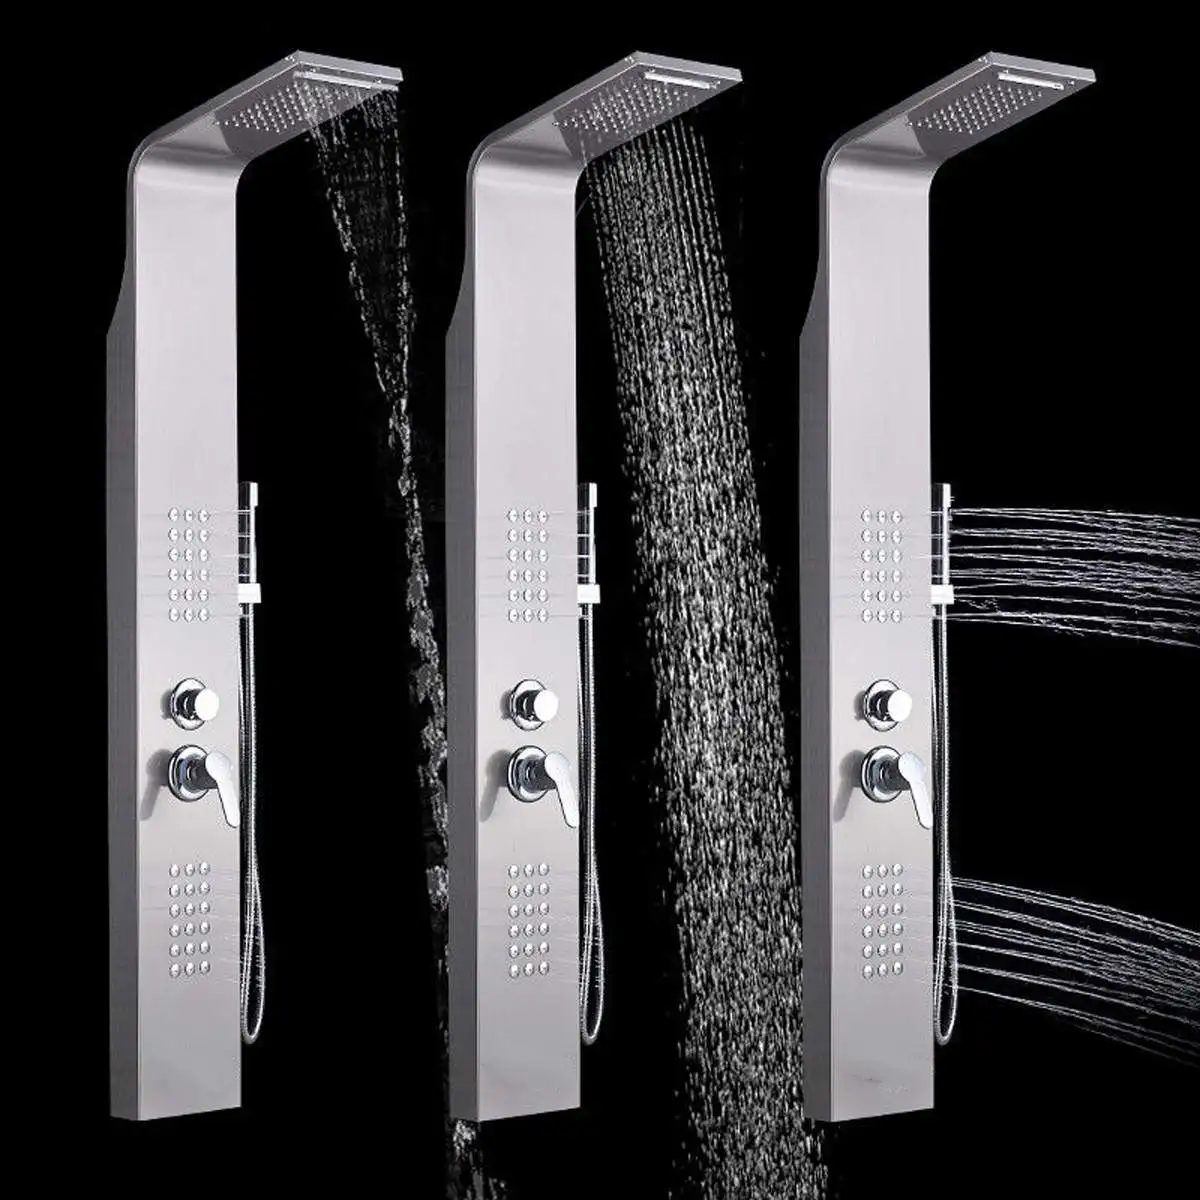 

NEW Brushed Nickel Shower Panel Tower Rain Waterfall Massage Body System Jet Tub Tap With Hand Shower Tub Spout